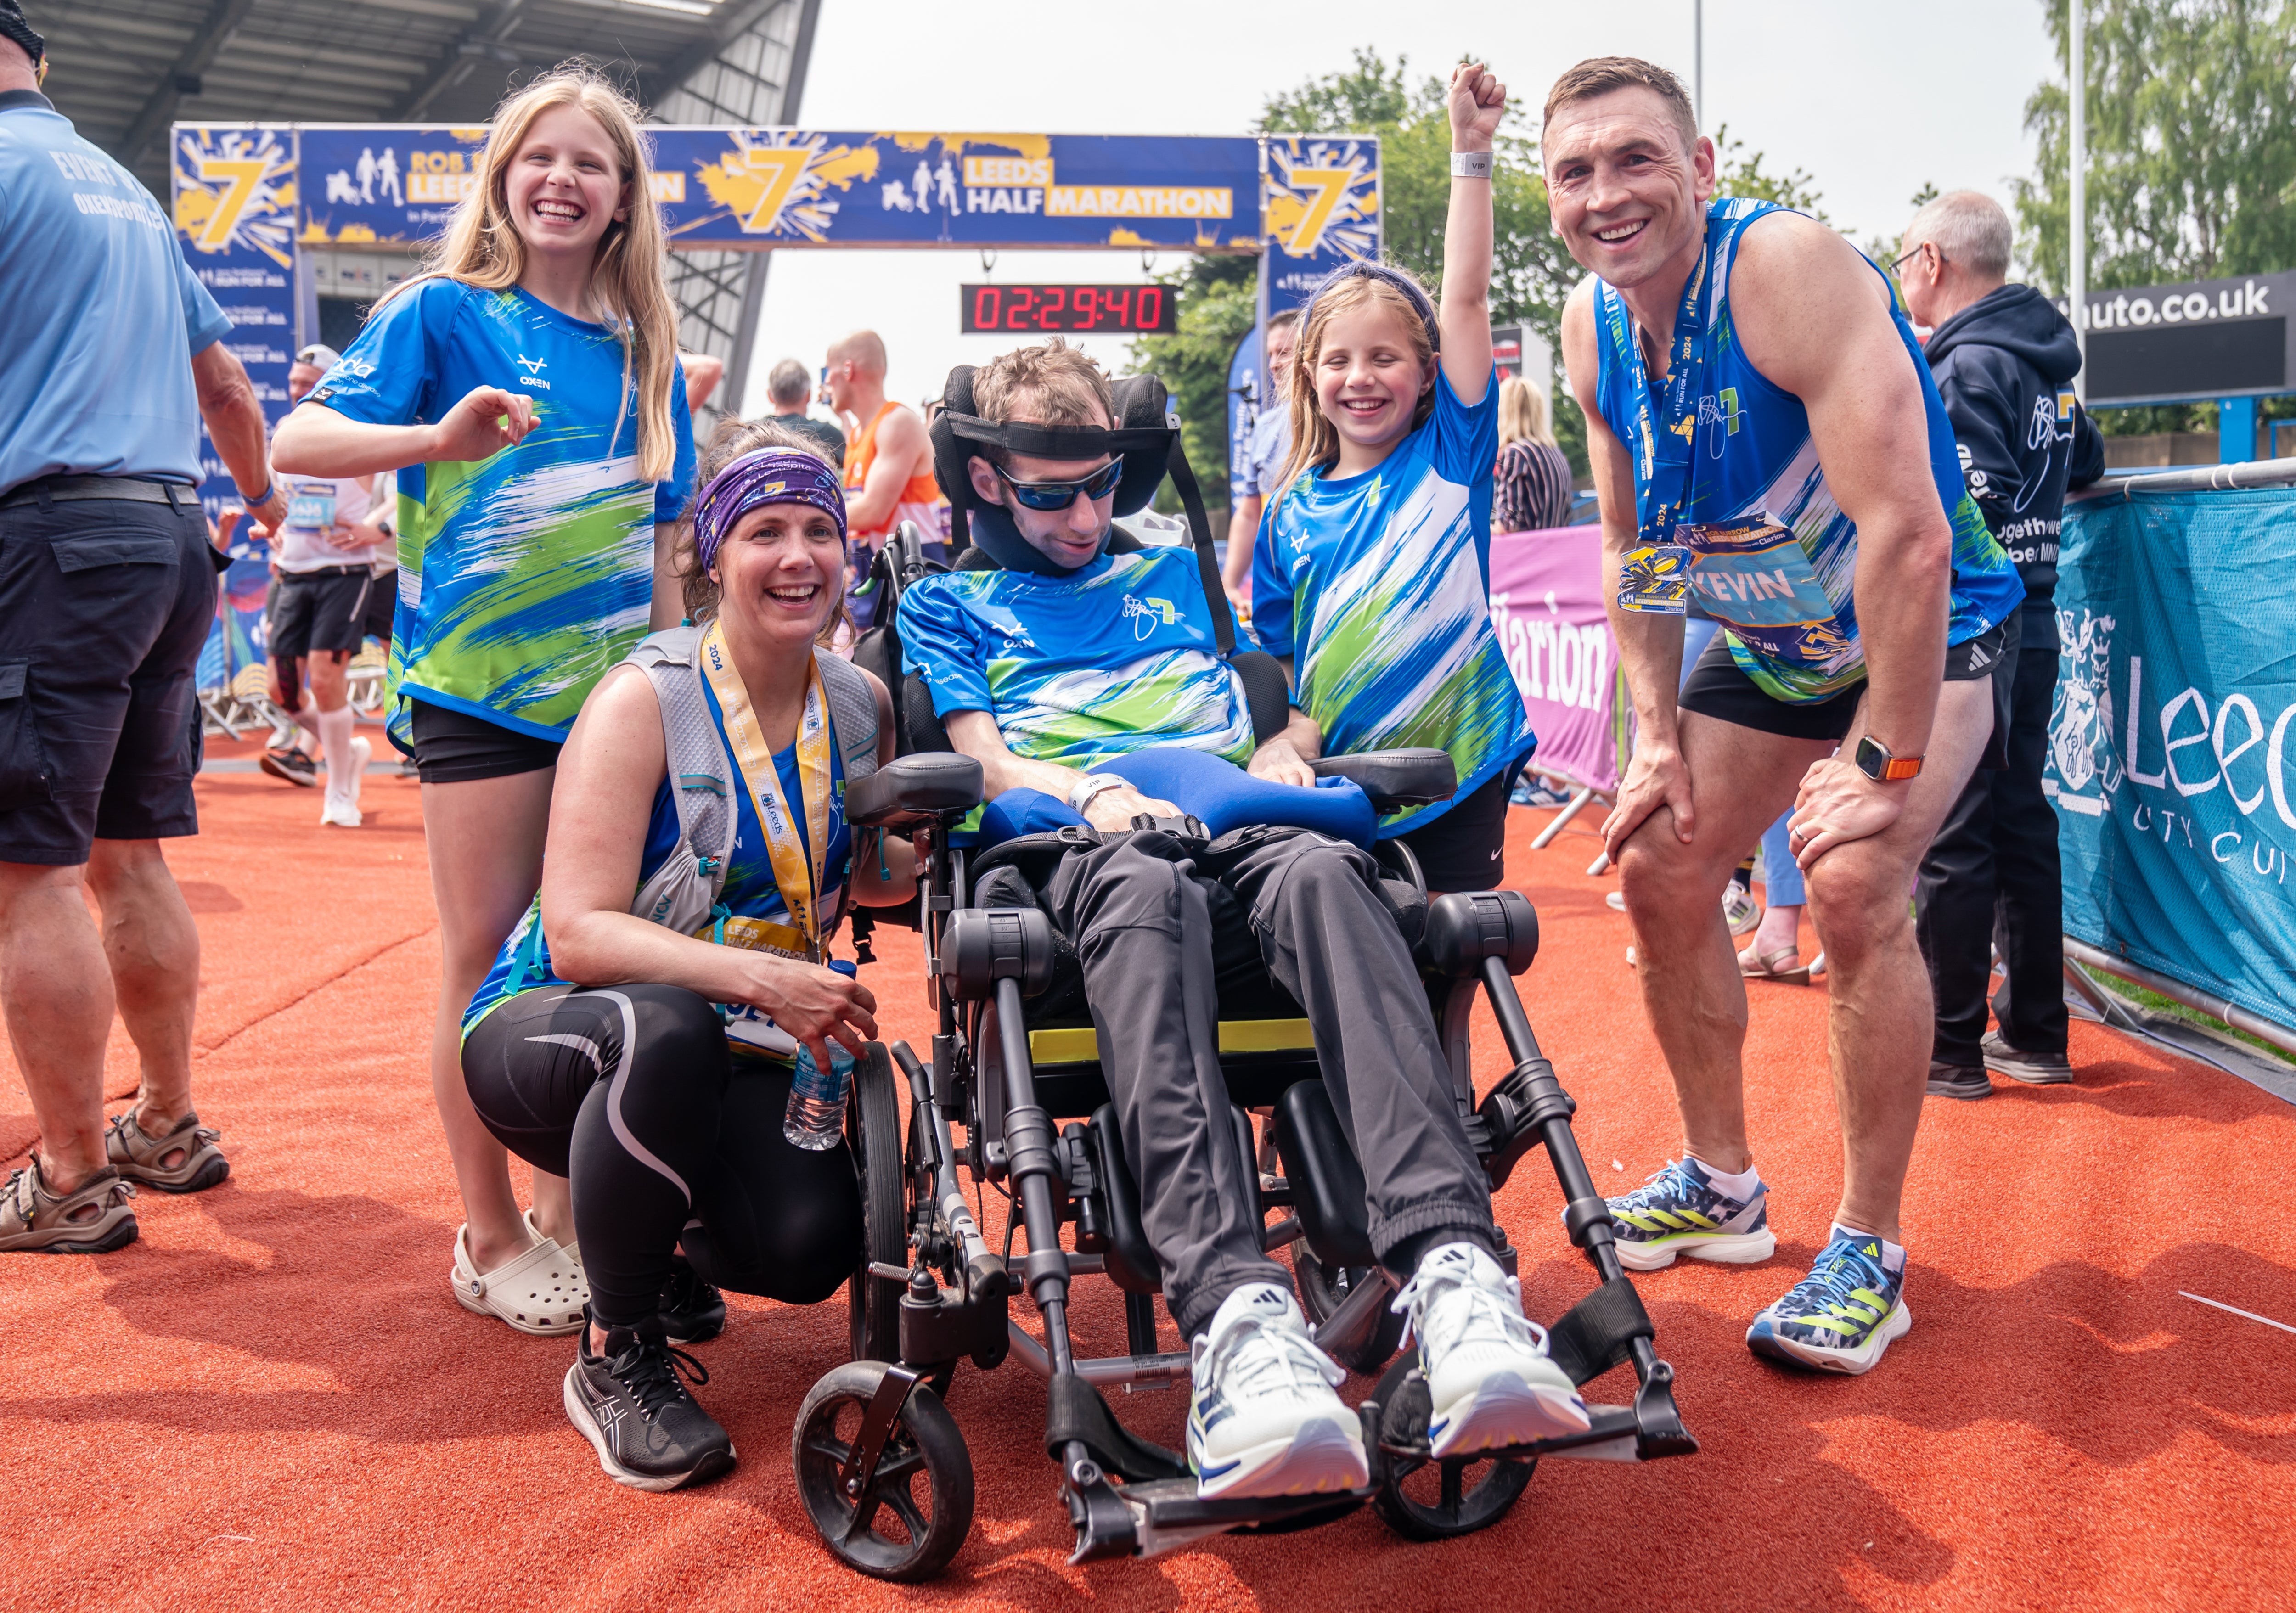 Burrow, pictured alongside wife Lindsey, daughters Macy and Maya, and Kevin Sinfield at the Leeds Marathon in May (Danny Lawson/PA)